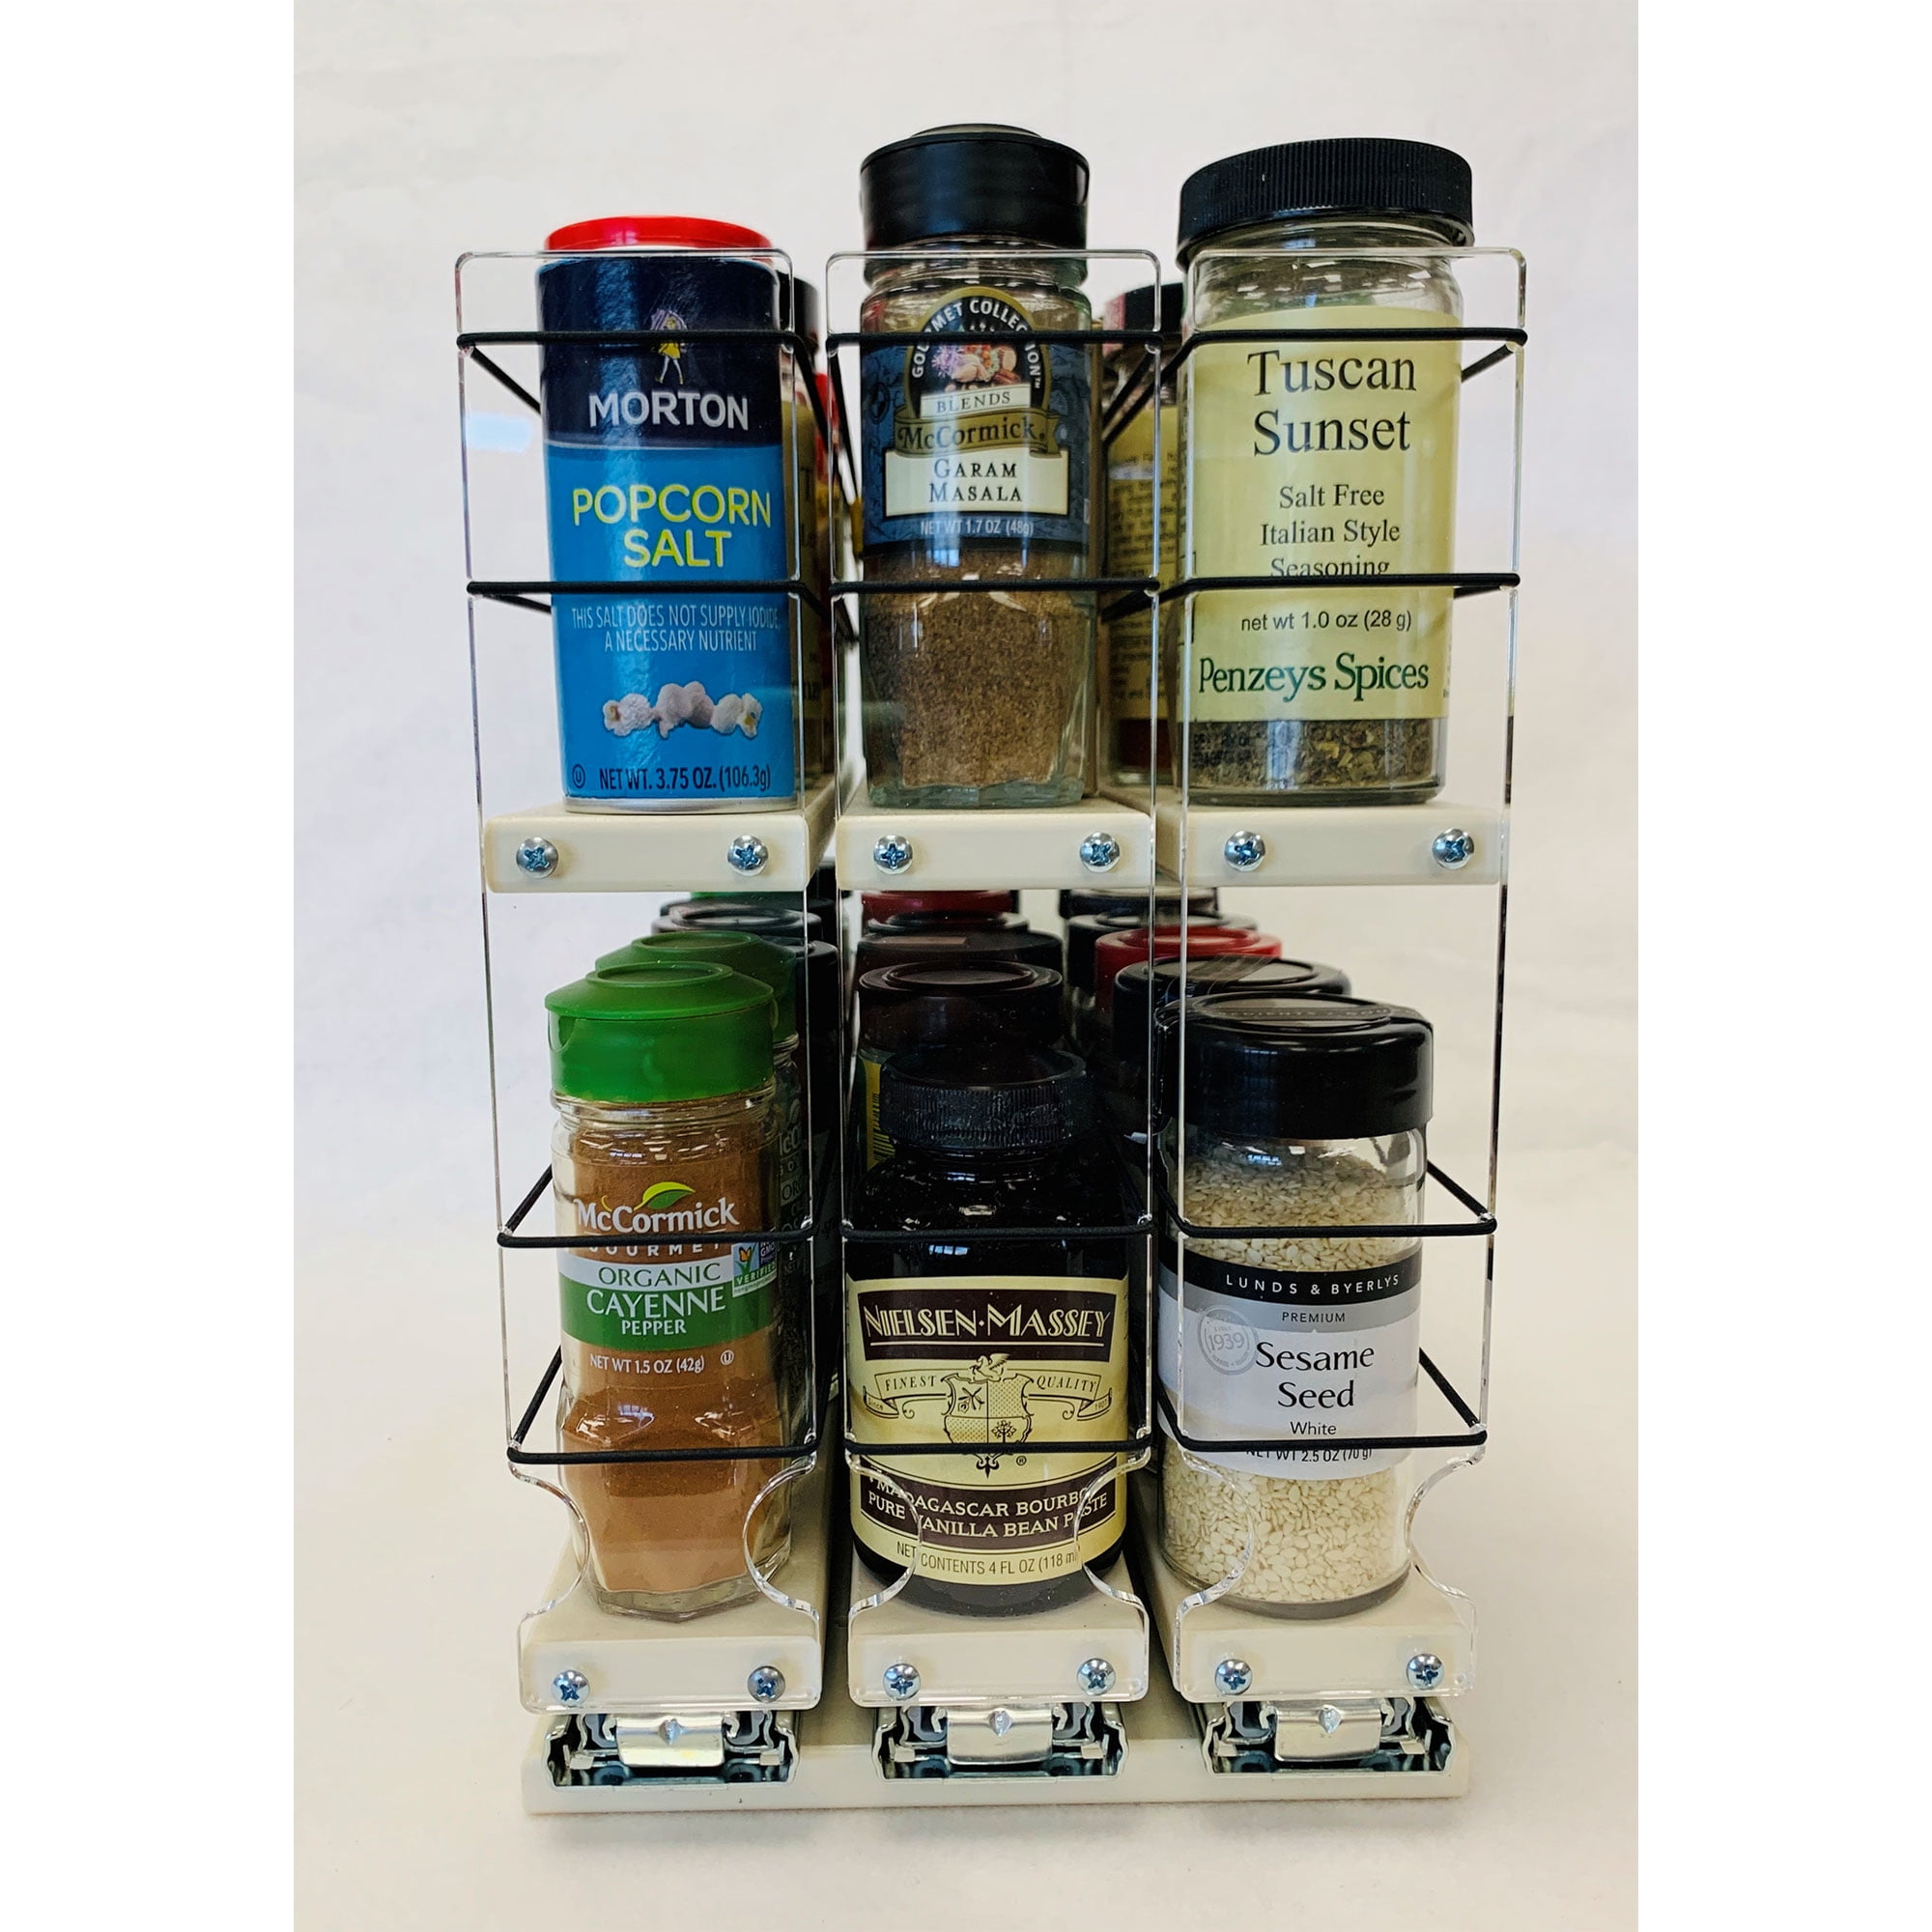 Vertical Spice 2x1x18 Spice Rack Drawer, Cream, 8 Jar Capacity with Flex-Sides, Sliding, Pullout